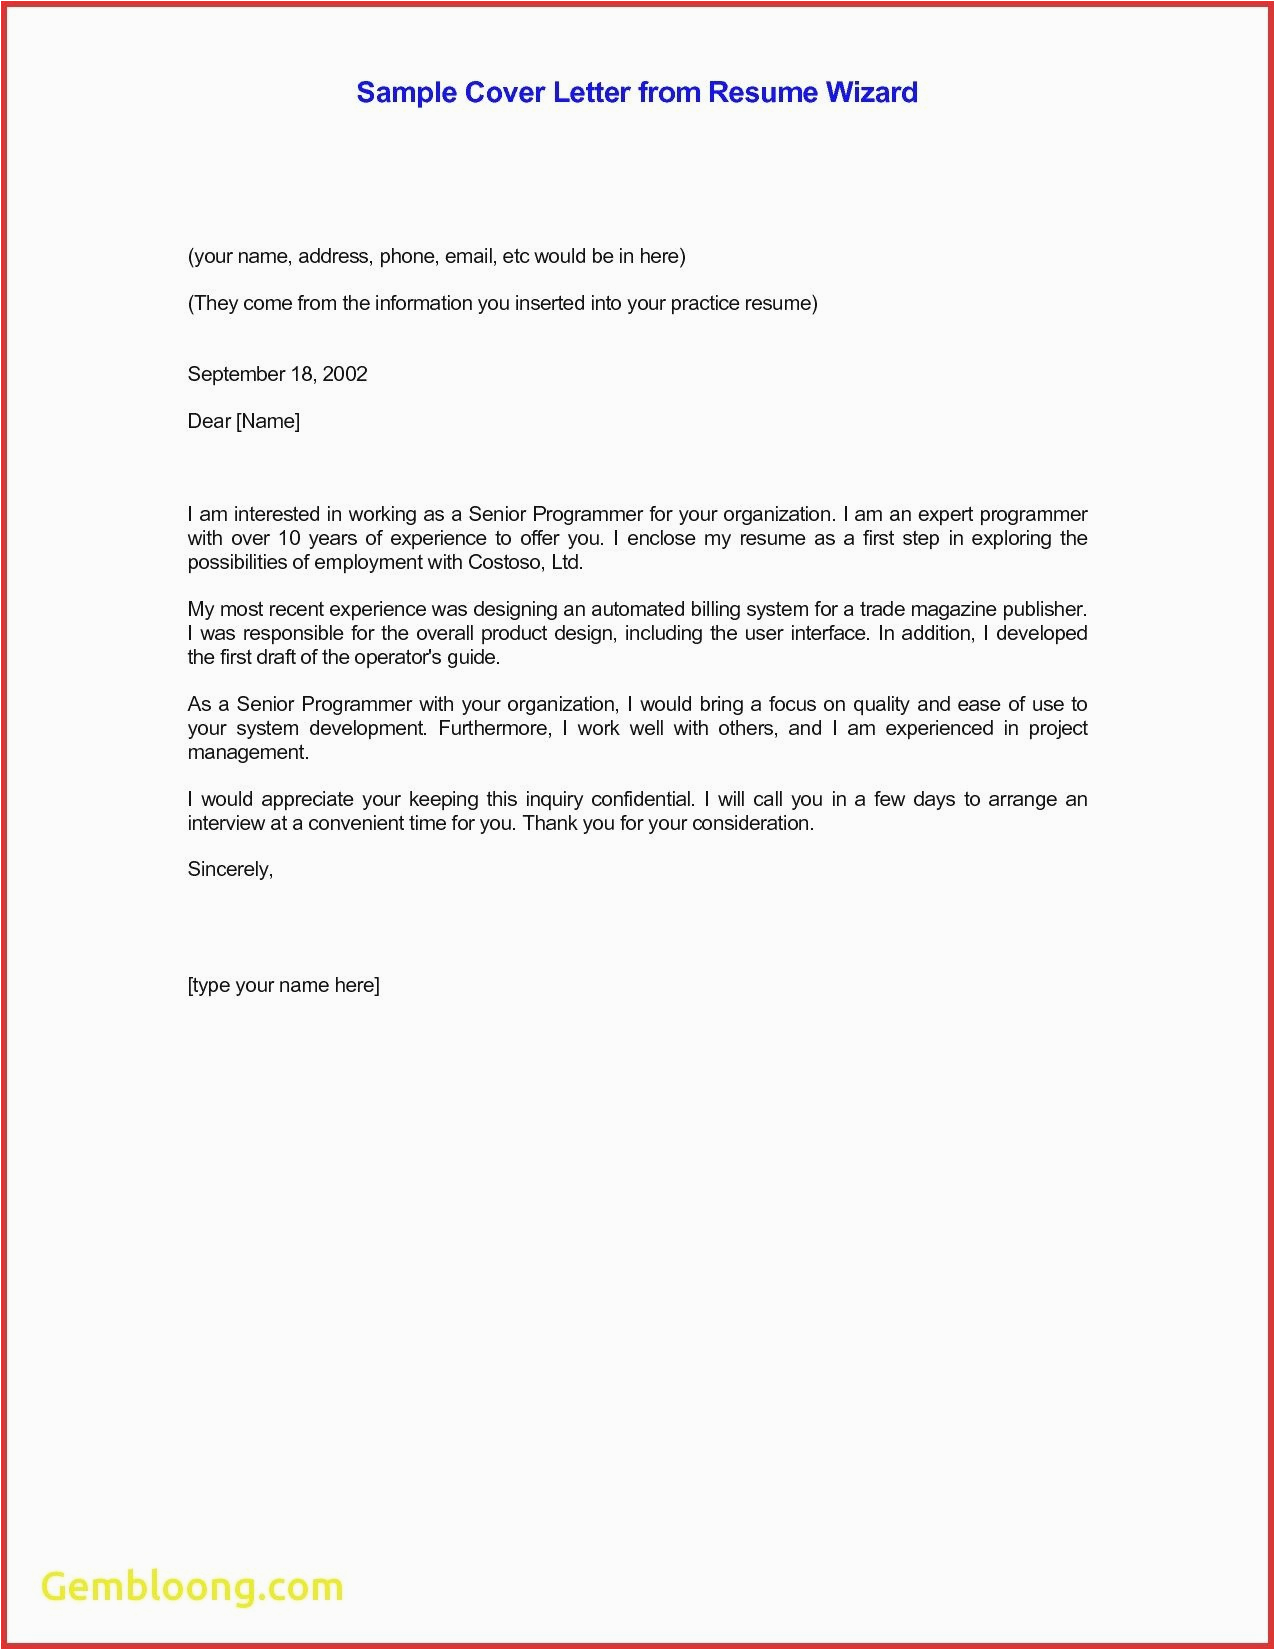 Email Resume and Cover Letter Sample Email Cv Cover Letter Template